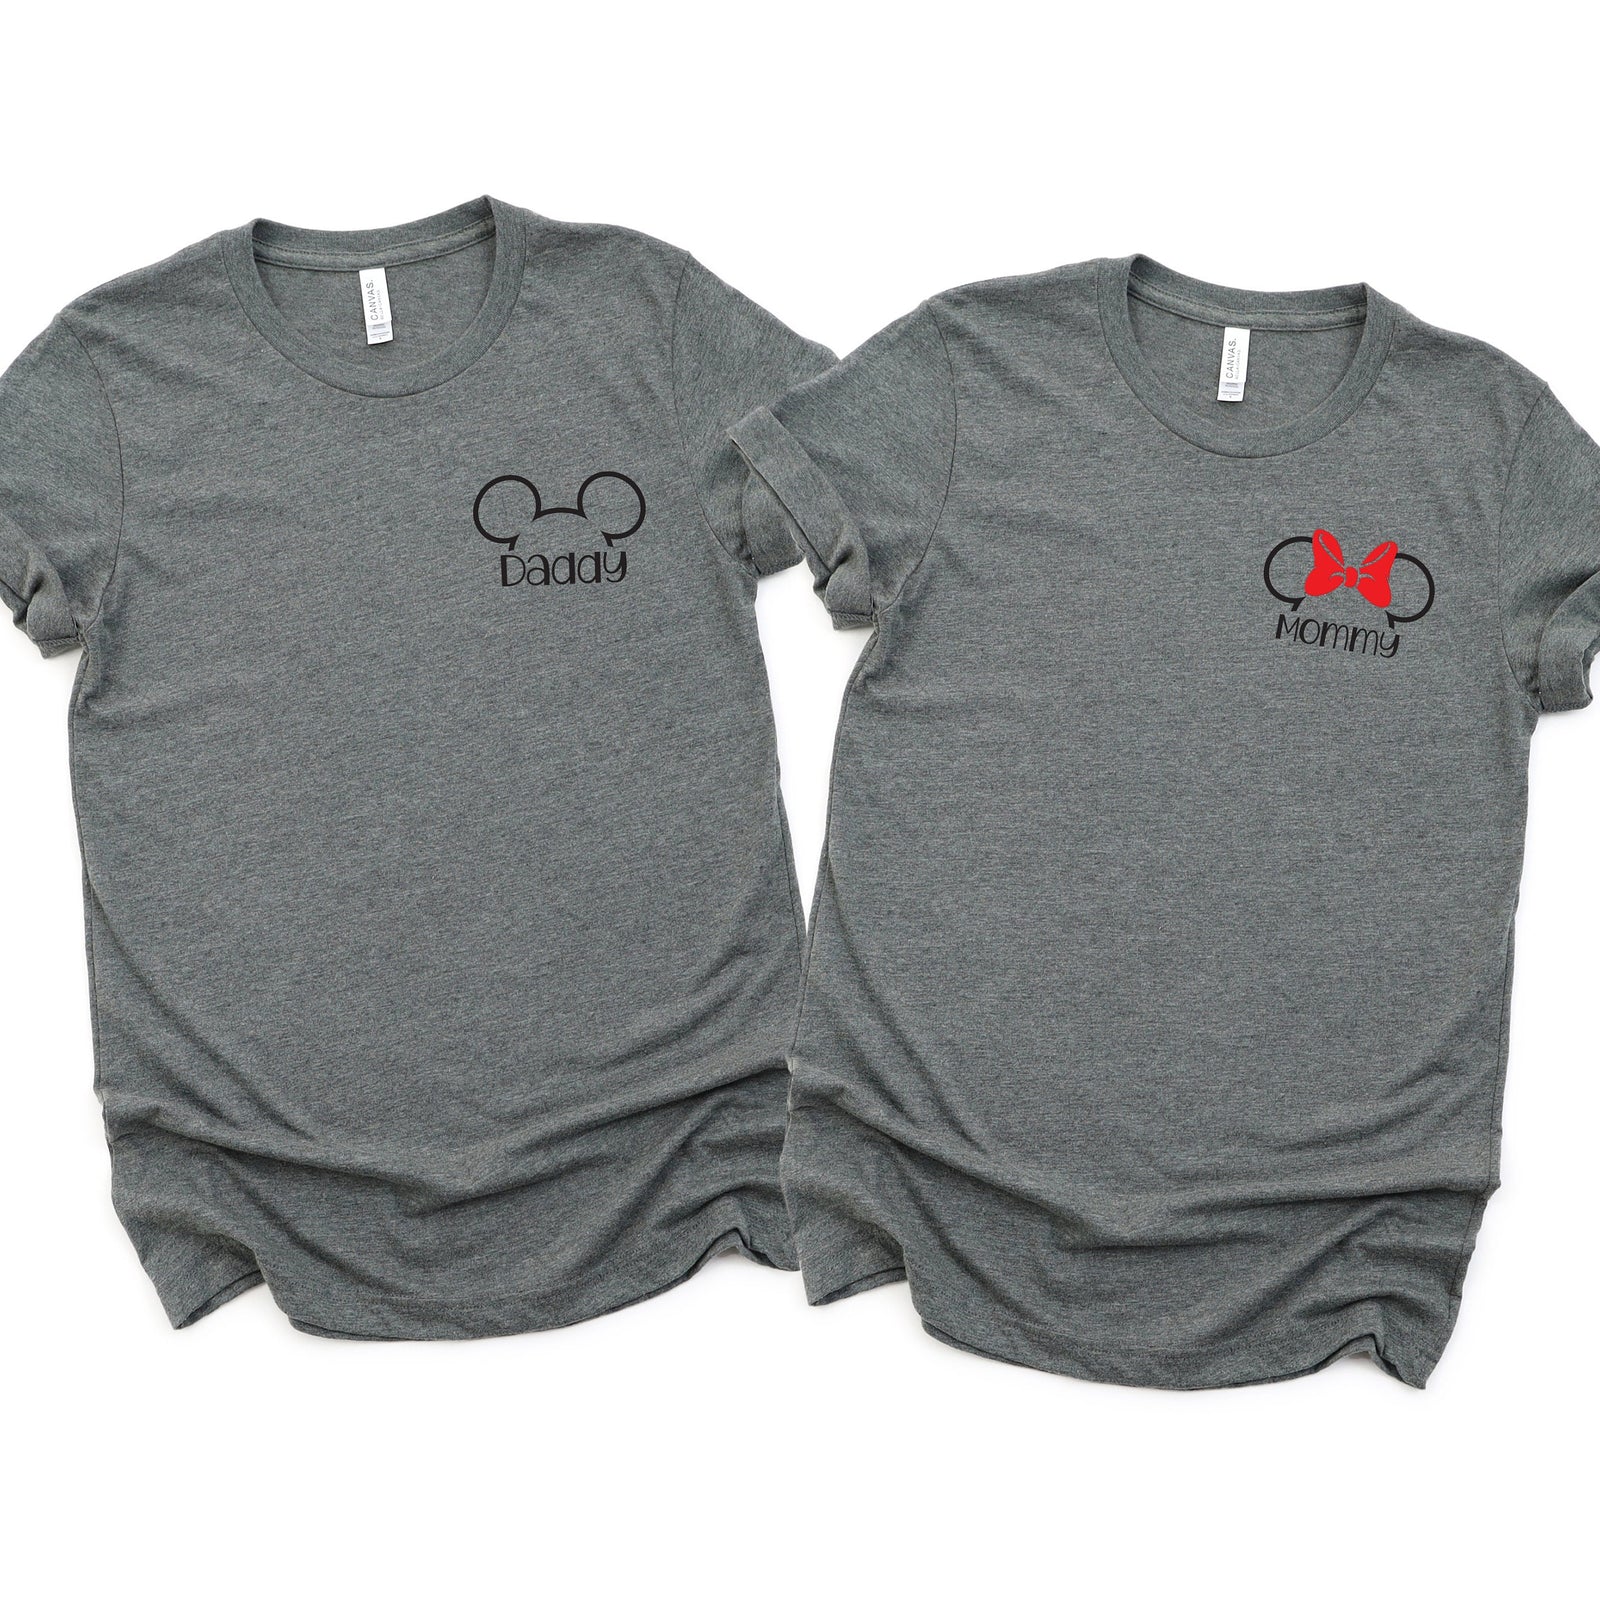 Mommy and Daddy Matching Disney Shirts - Disney Couples - Mickey and Minnie Mouse Ears Outline Pocket Size